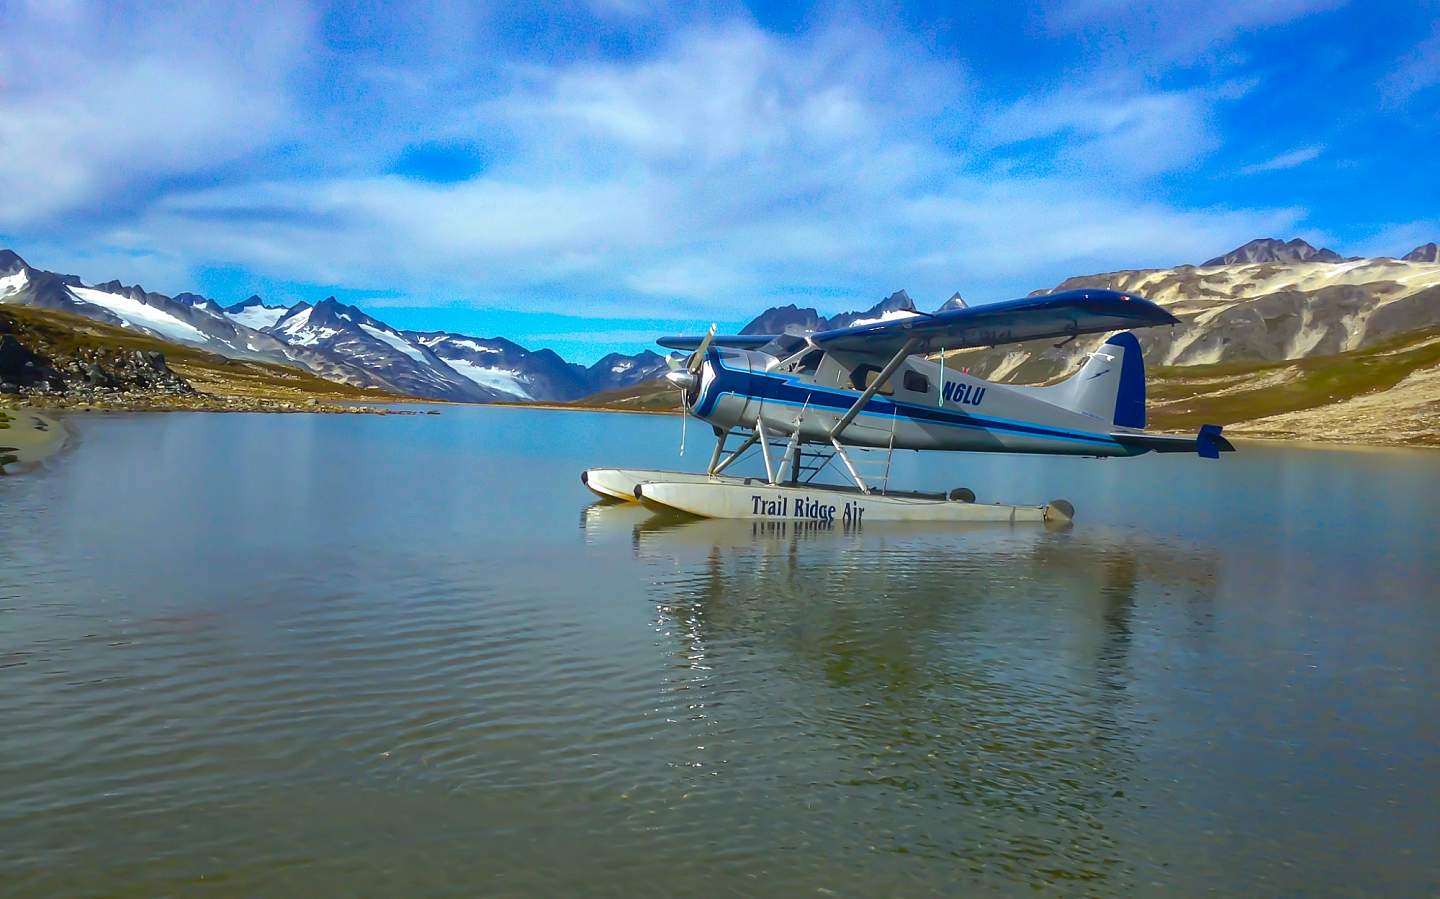 A silver and blue float plane sits on the water with mountains in the background.